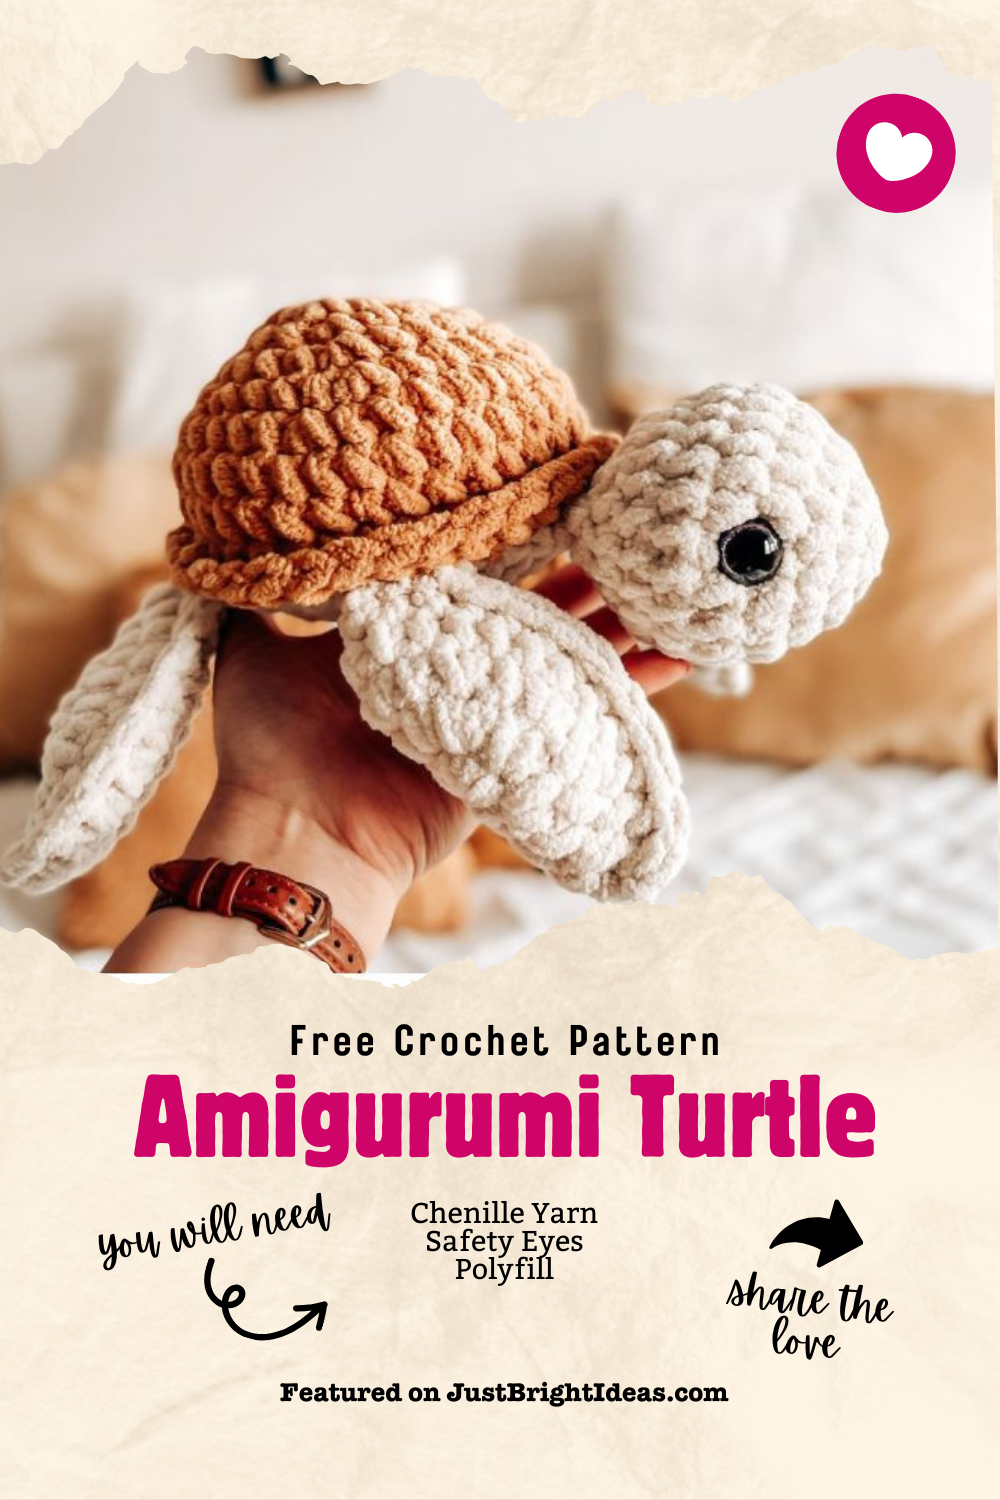 Dive into crochet bliss with our seamless Amigurumi Sea Turtle pattern! 🐢🌊 No sewing needed, thanks to smart join-as-you-go technique! Crafted with plush chenille yarn for extra cuddliness. Perfect for all skill levels! 🧶💕 #CrochetPattern #Amigurumi #ChenilleCrafts